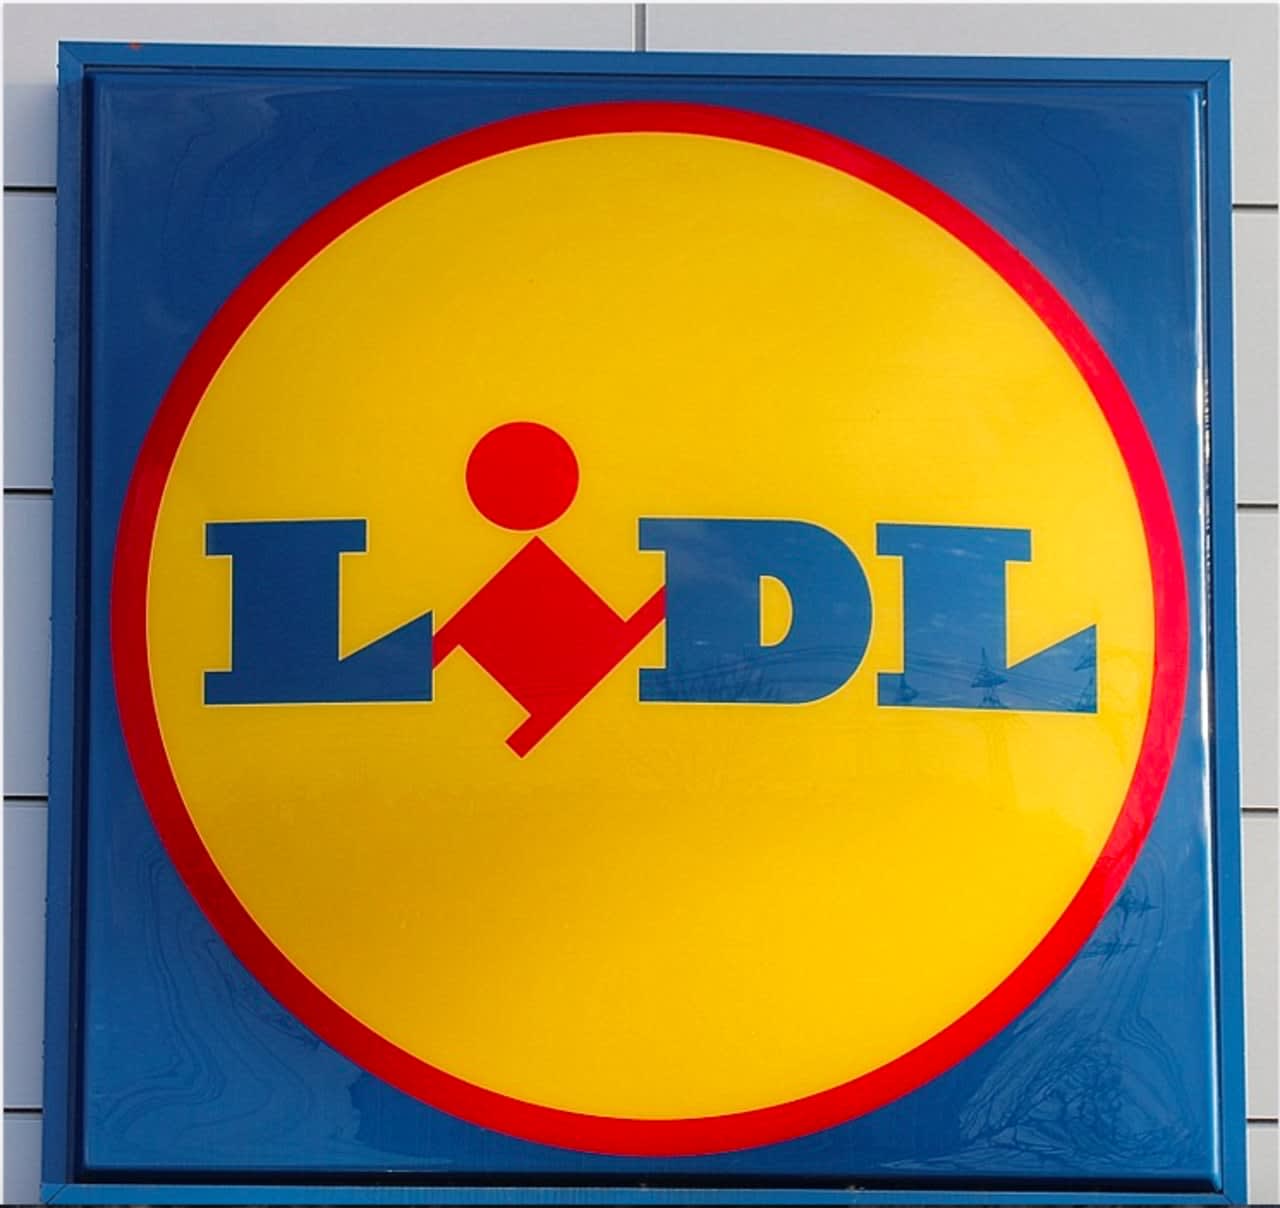 Lidl aims to open 103 new U.S. storefronts this year.